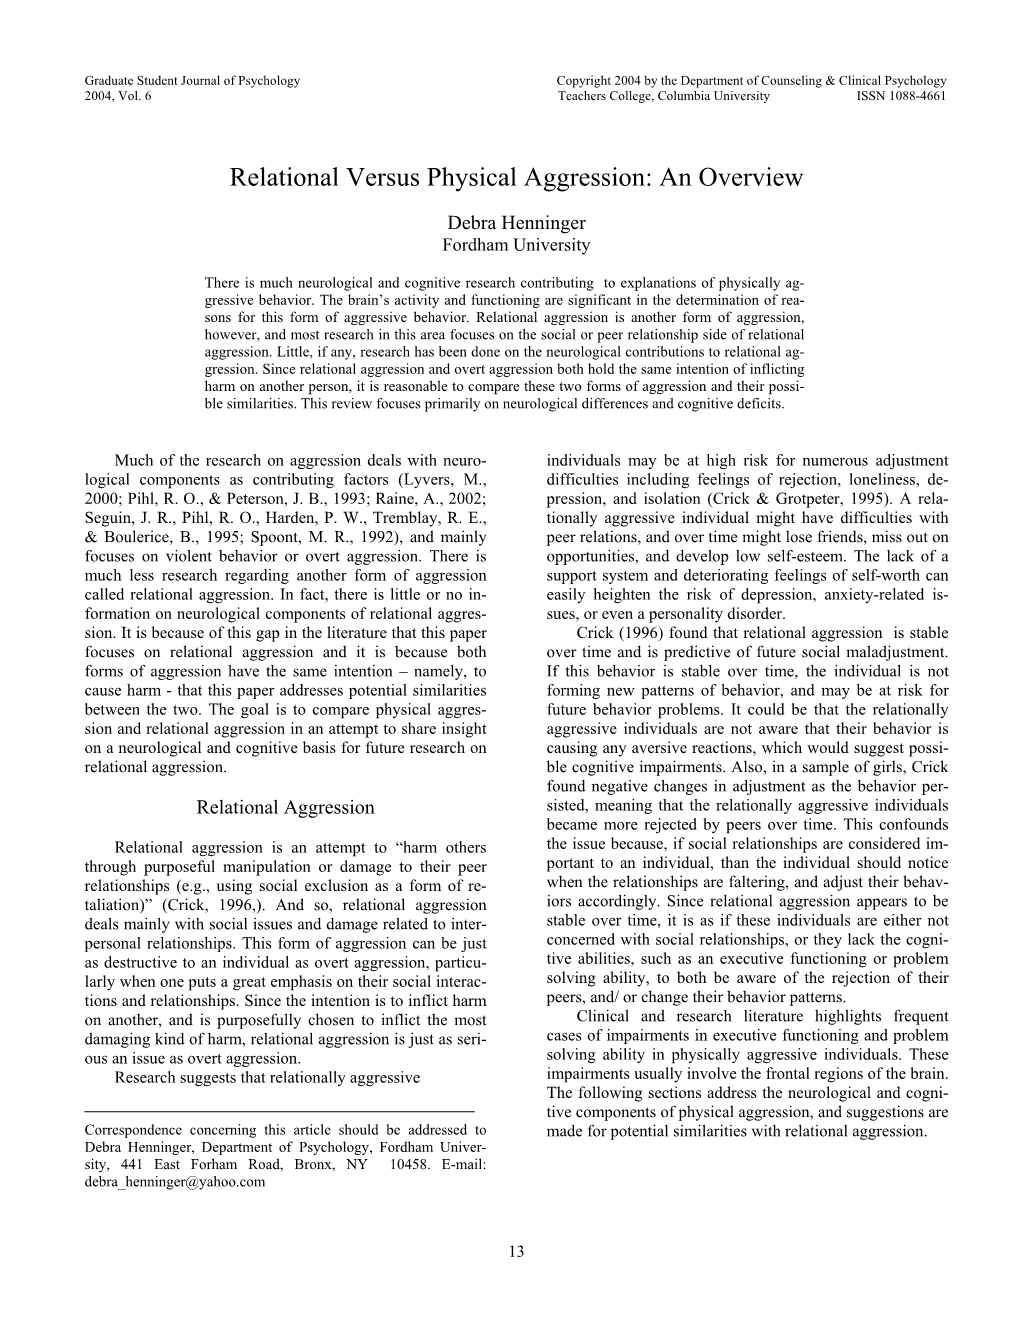 Relational Versus Physical Aggression: an Overview